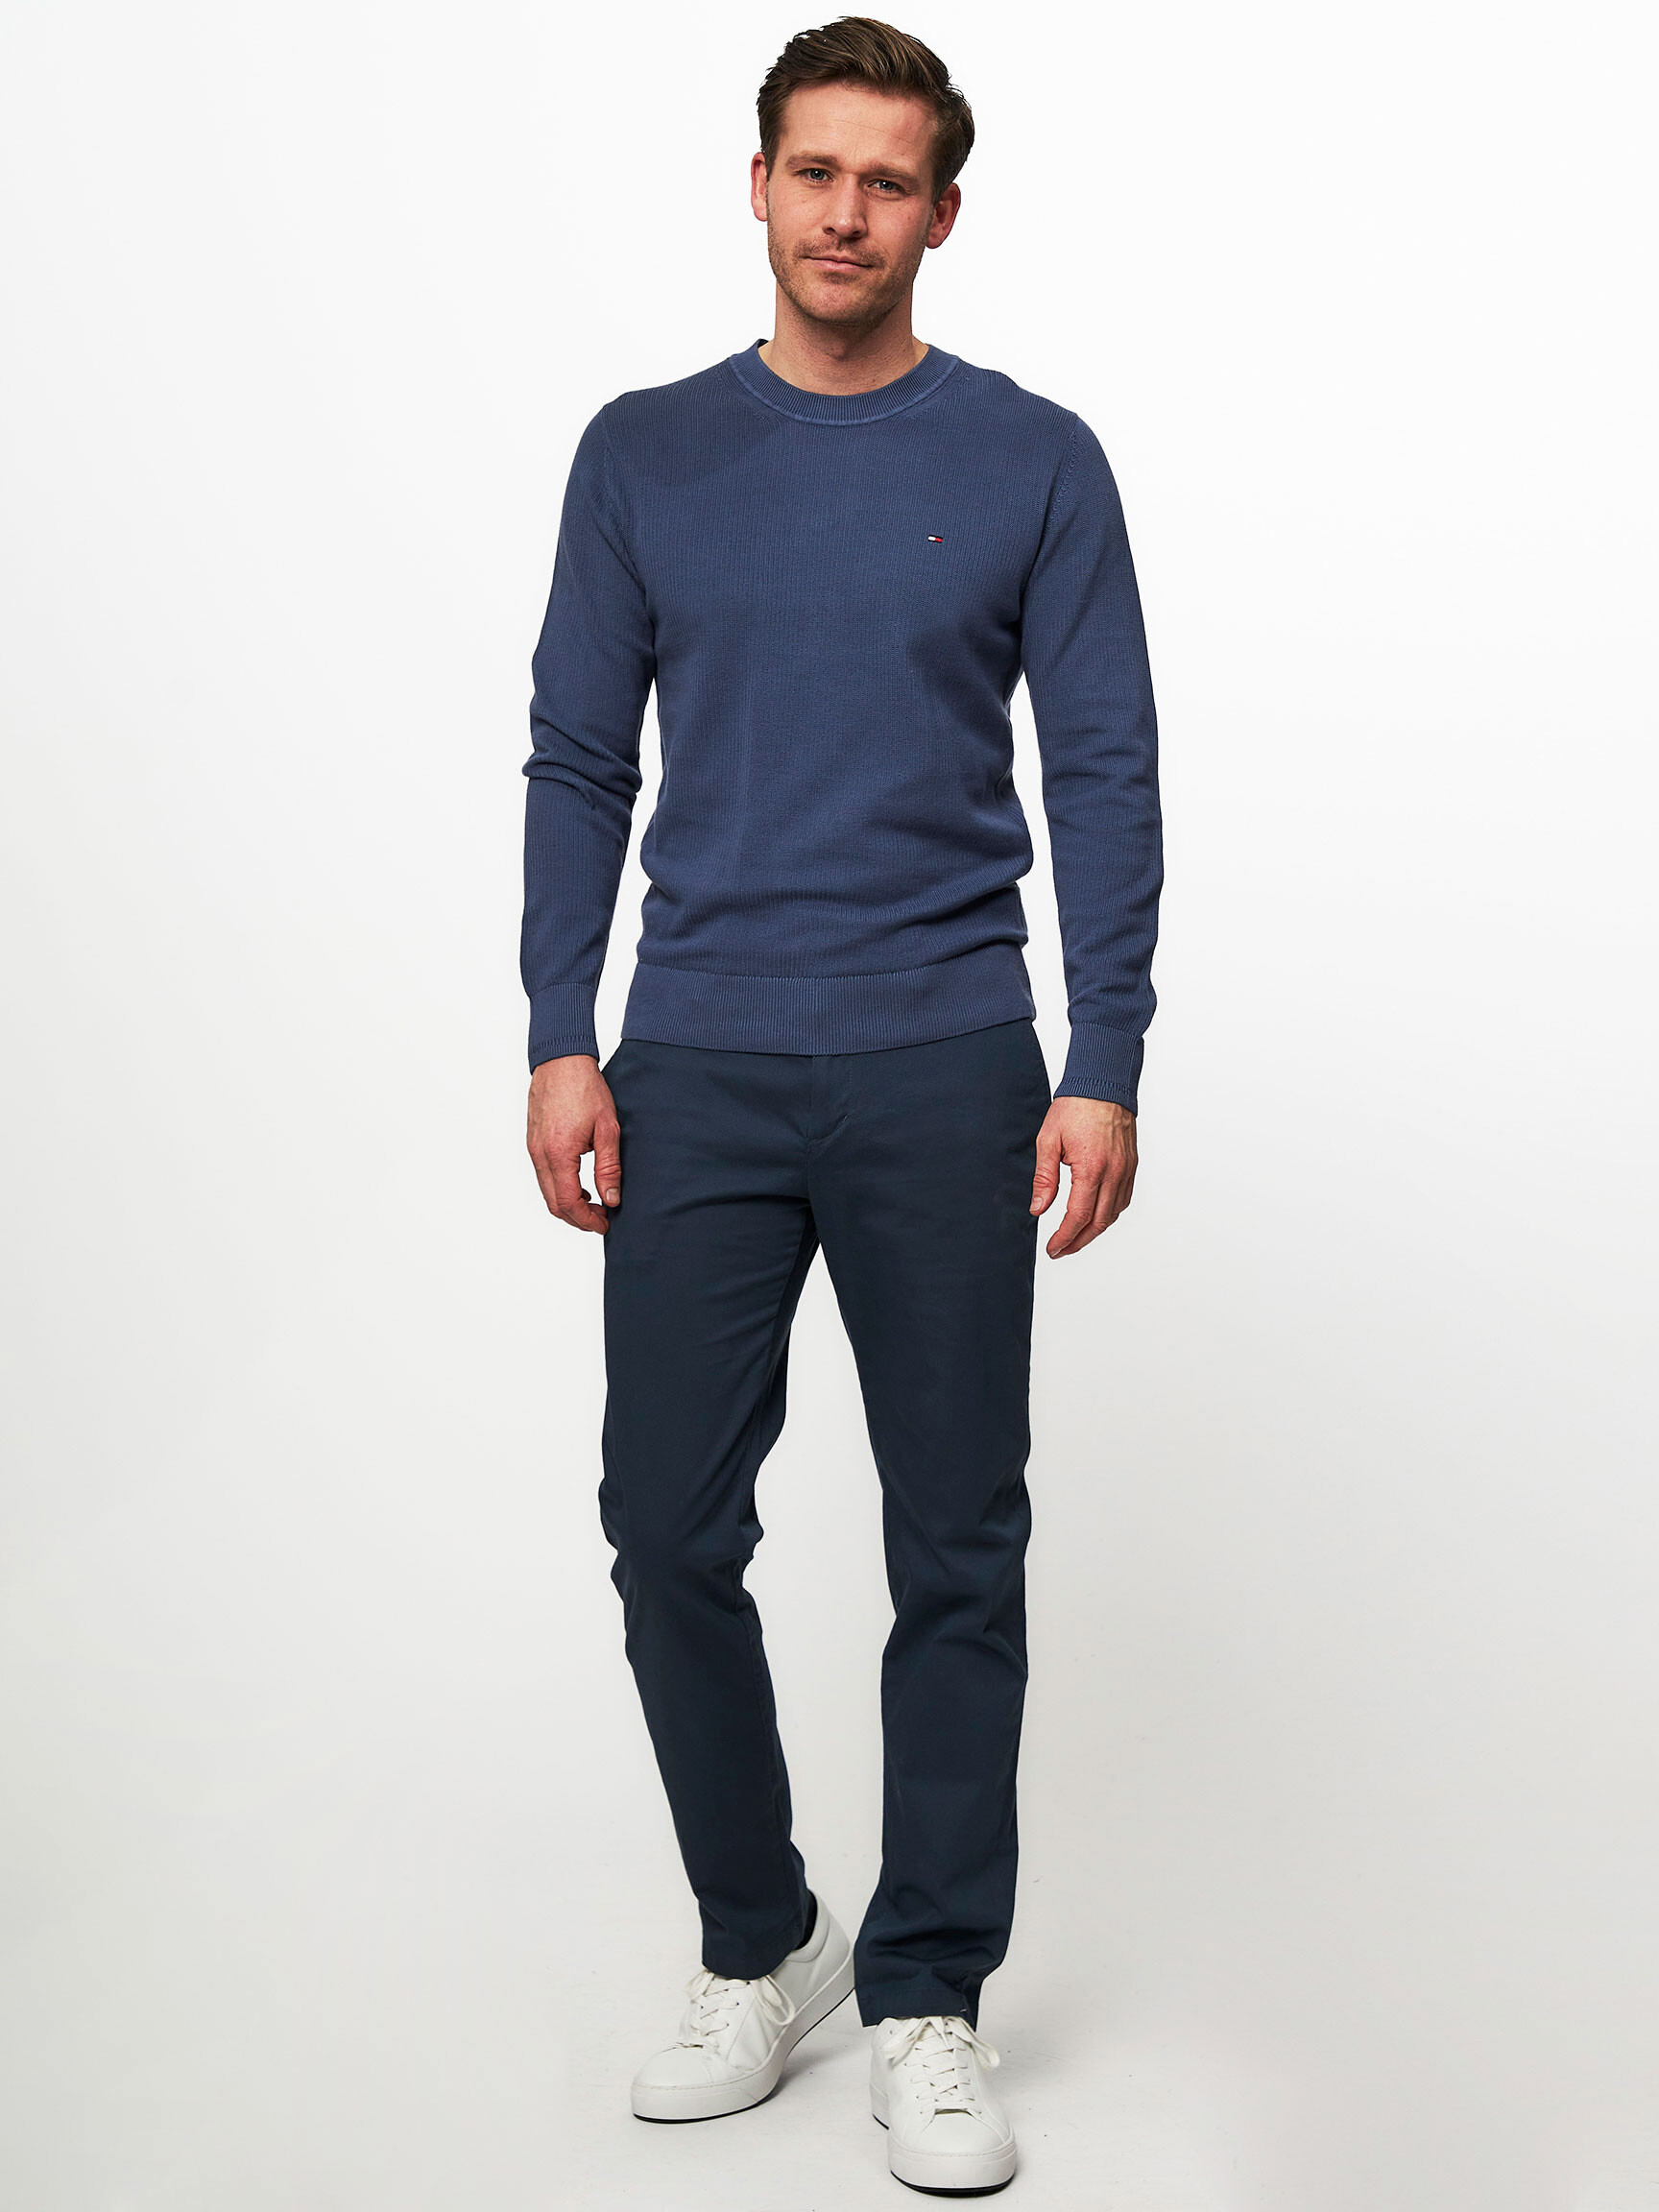 TOMMY HILFIGER MEN | SWEATERS AND CARDIGANS | JUMPERS